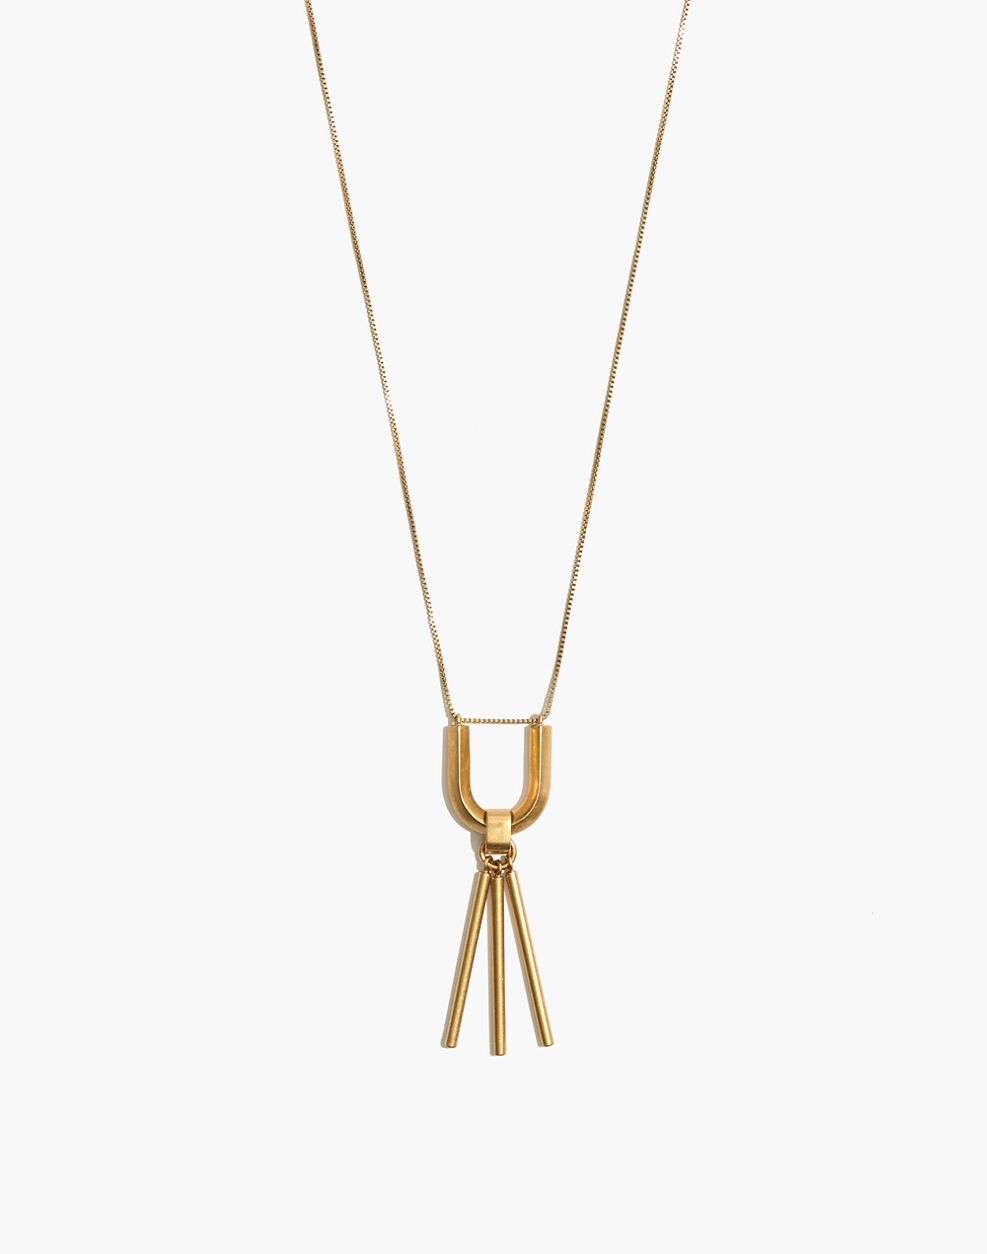 Curvelink Pendant Necklace | Madewell